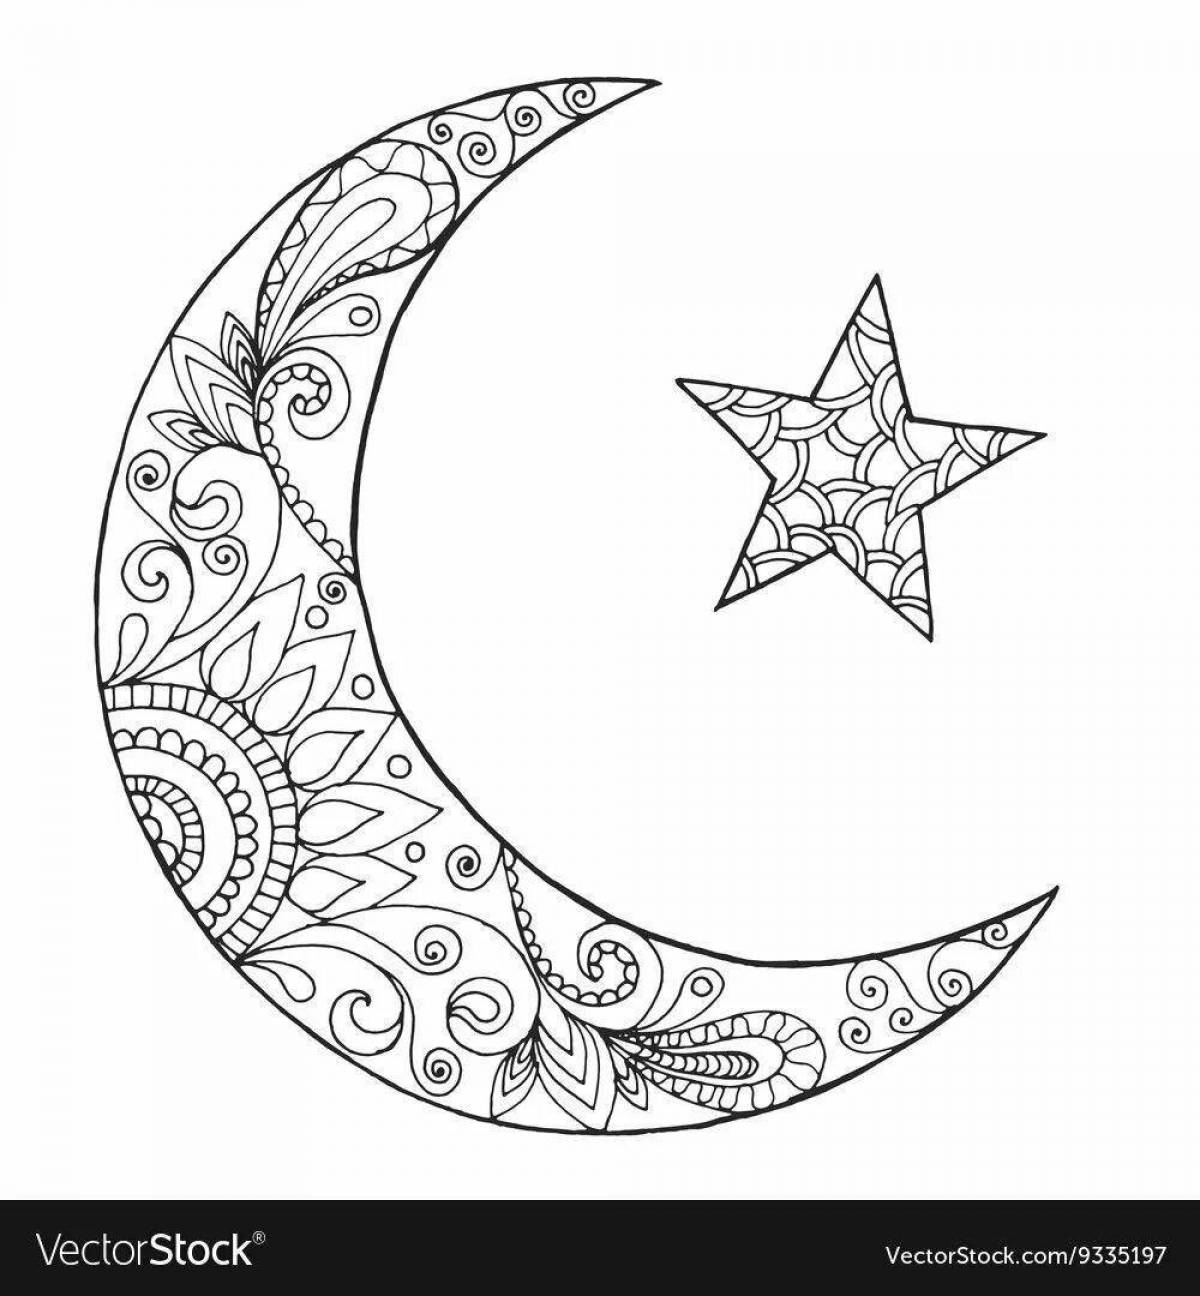 Coloring exalted moon and stars